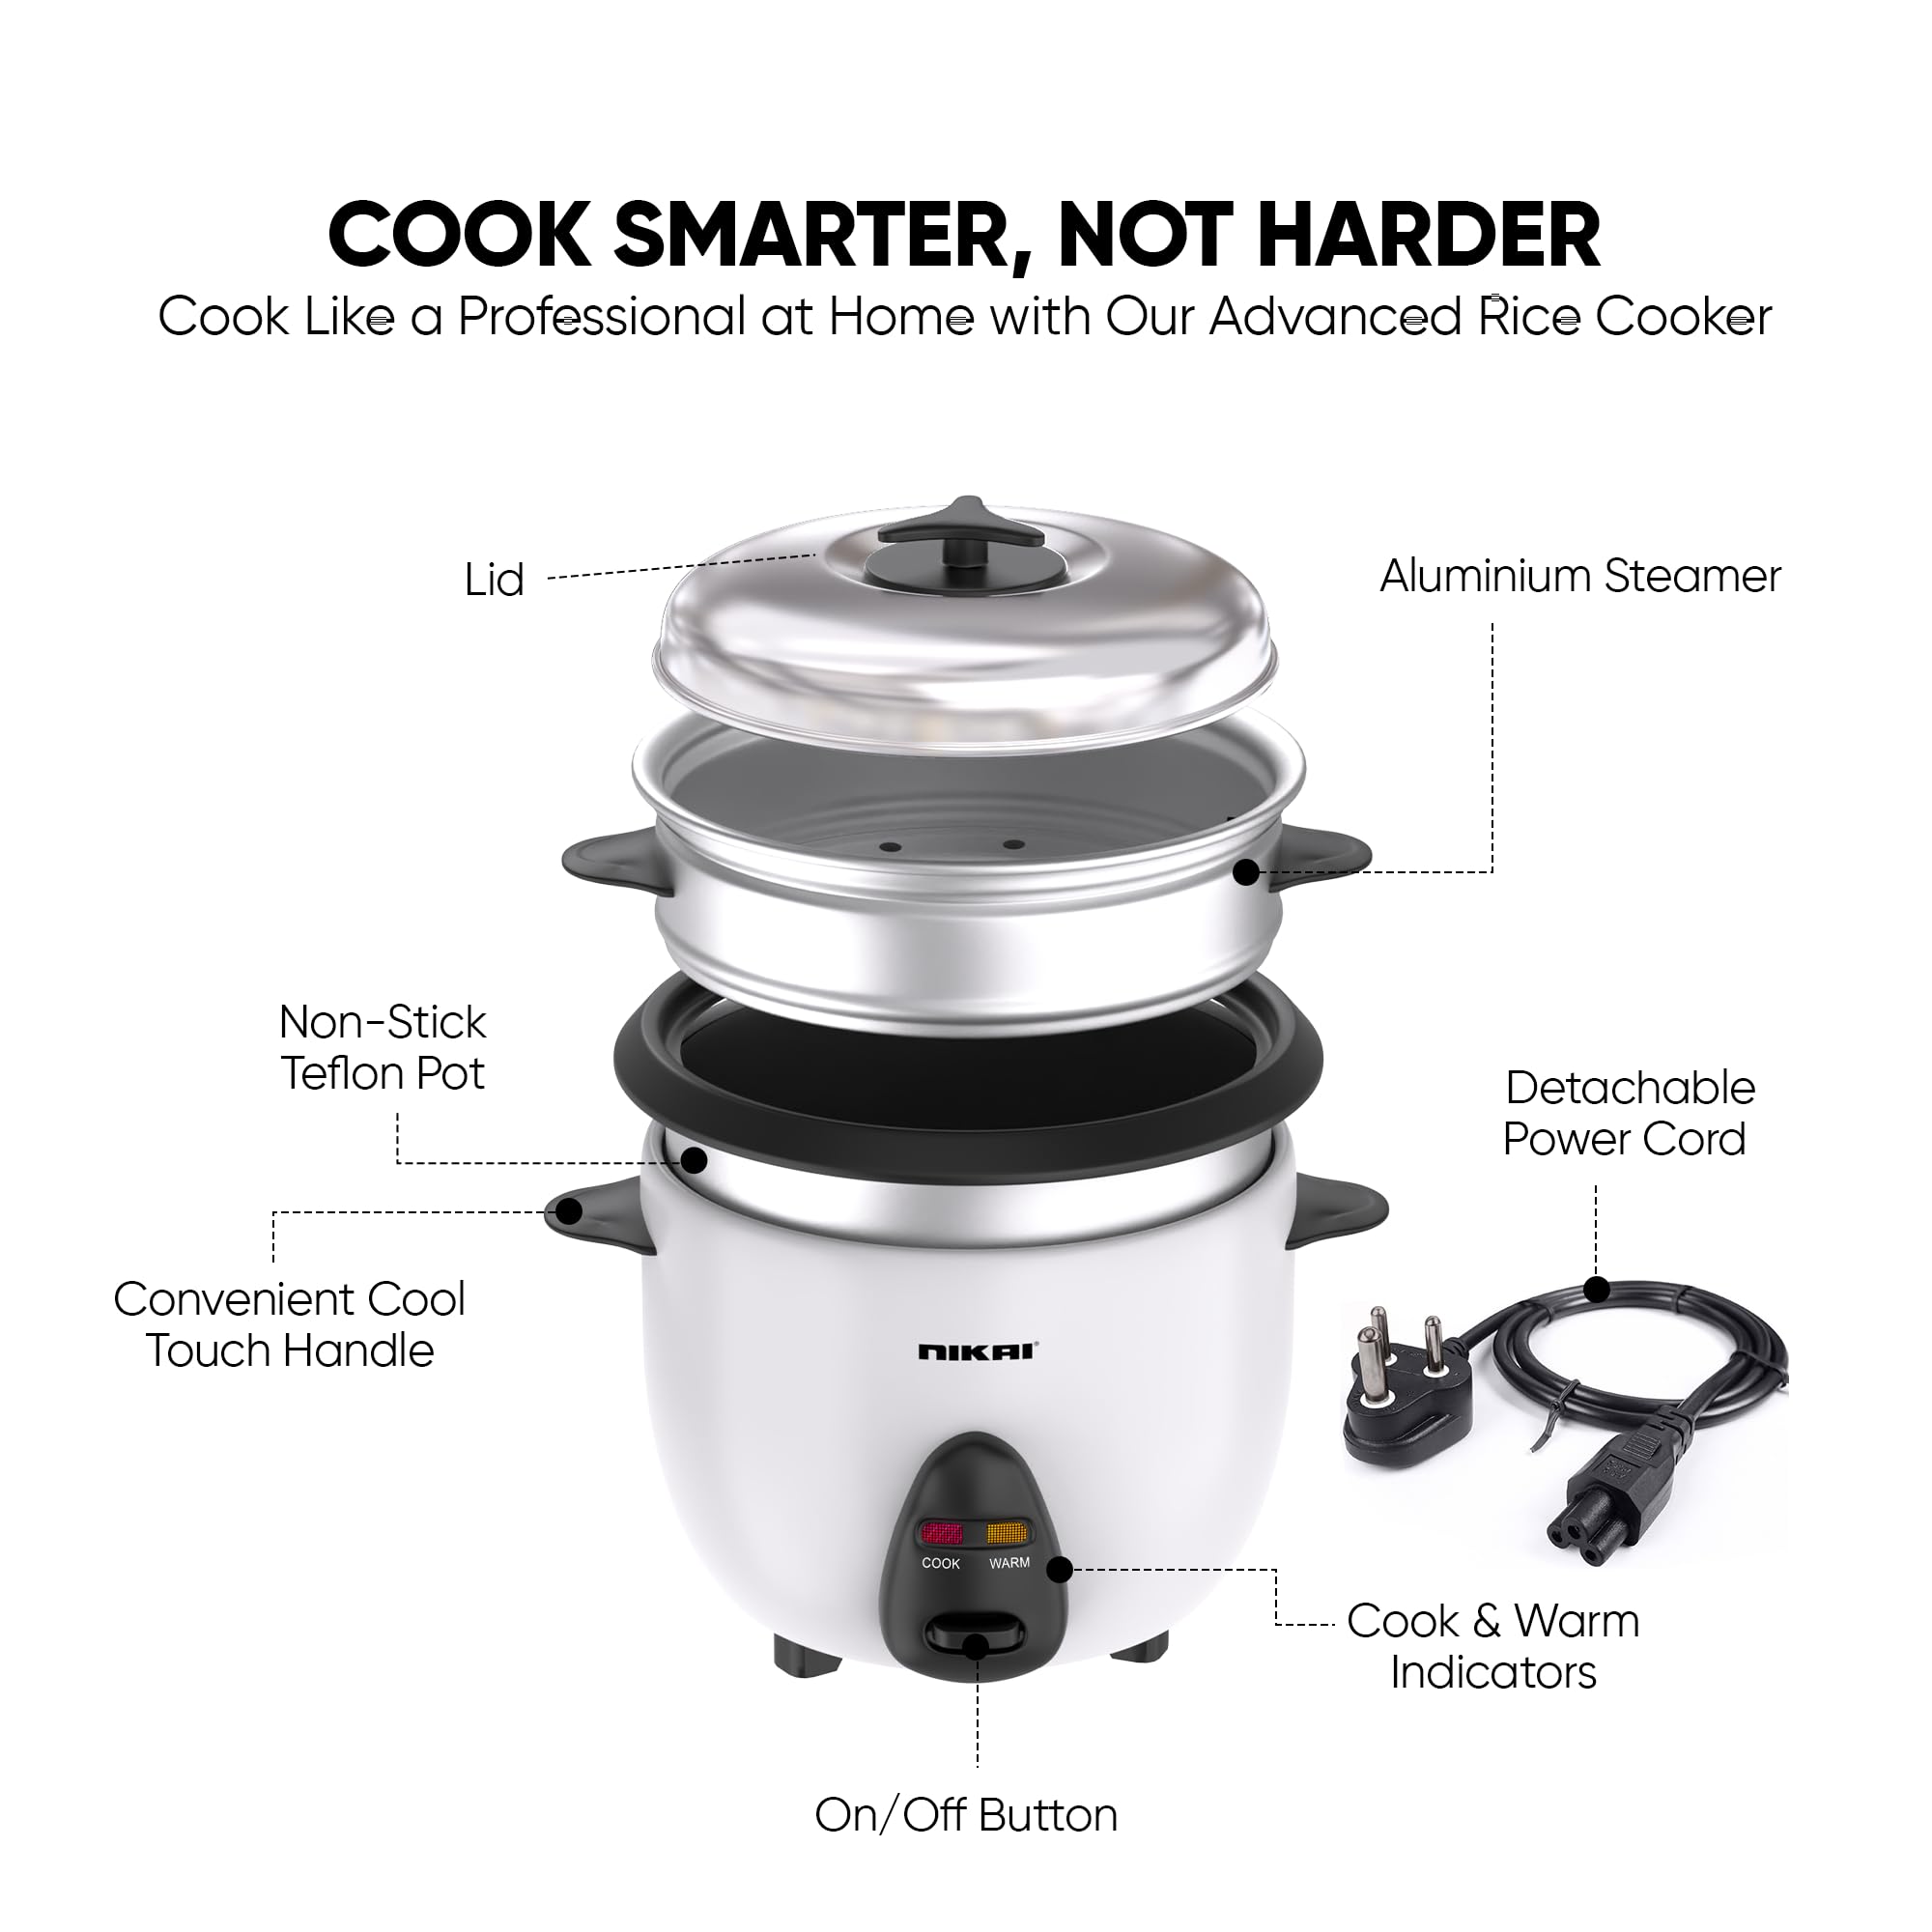 Nikai 400W 1L 2-in-1 Rice Cooker with Steamer, Non-Stick Convenience Pot and Keep Warm Function for Flawless Meals, Detachable Cord, Cook, Steam, and Keep Warm with Ease and Efficiency - NR701A